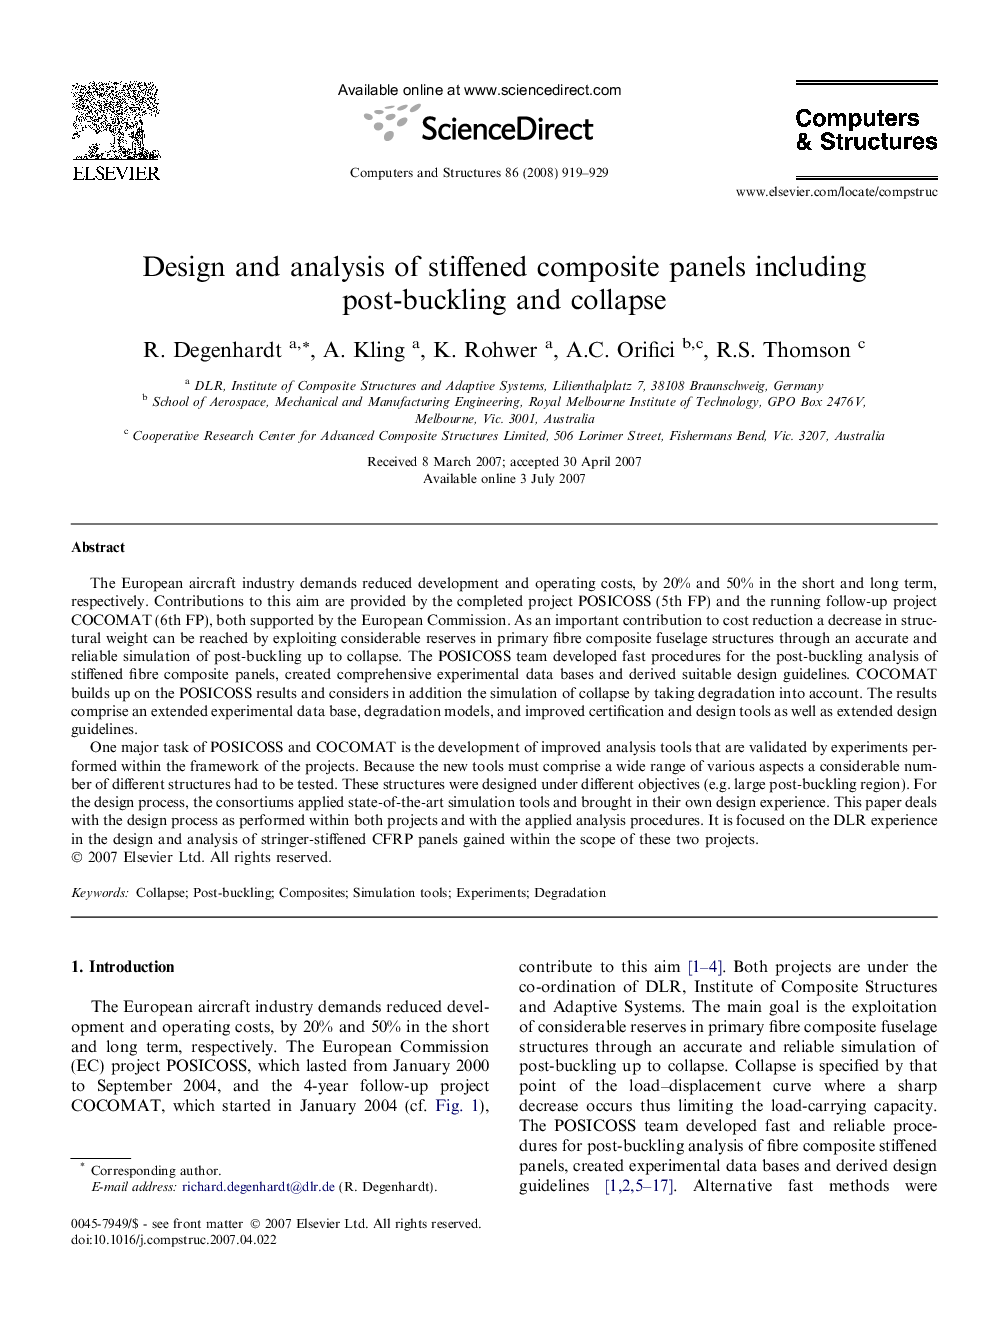 Design and analysis of stiffened composite panels including post-buckling and collapse